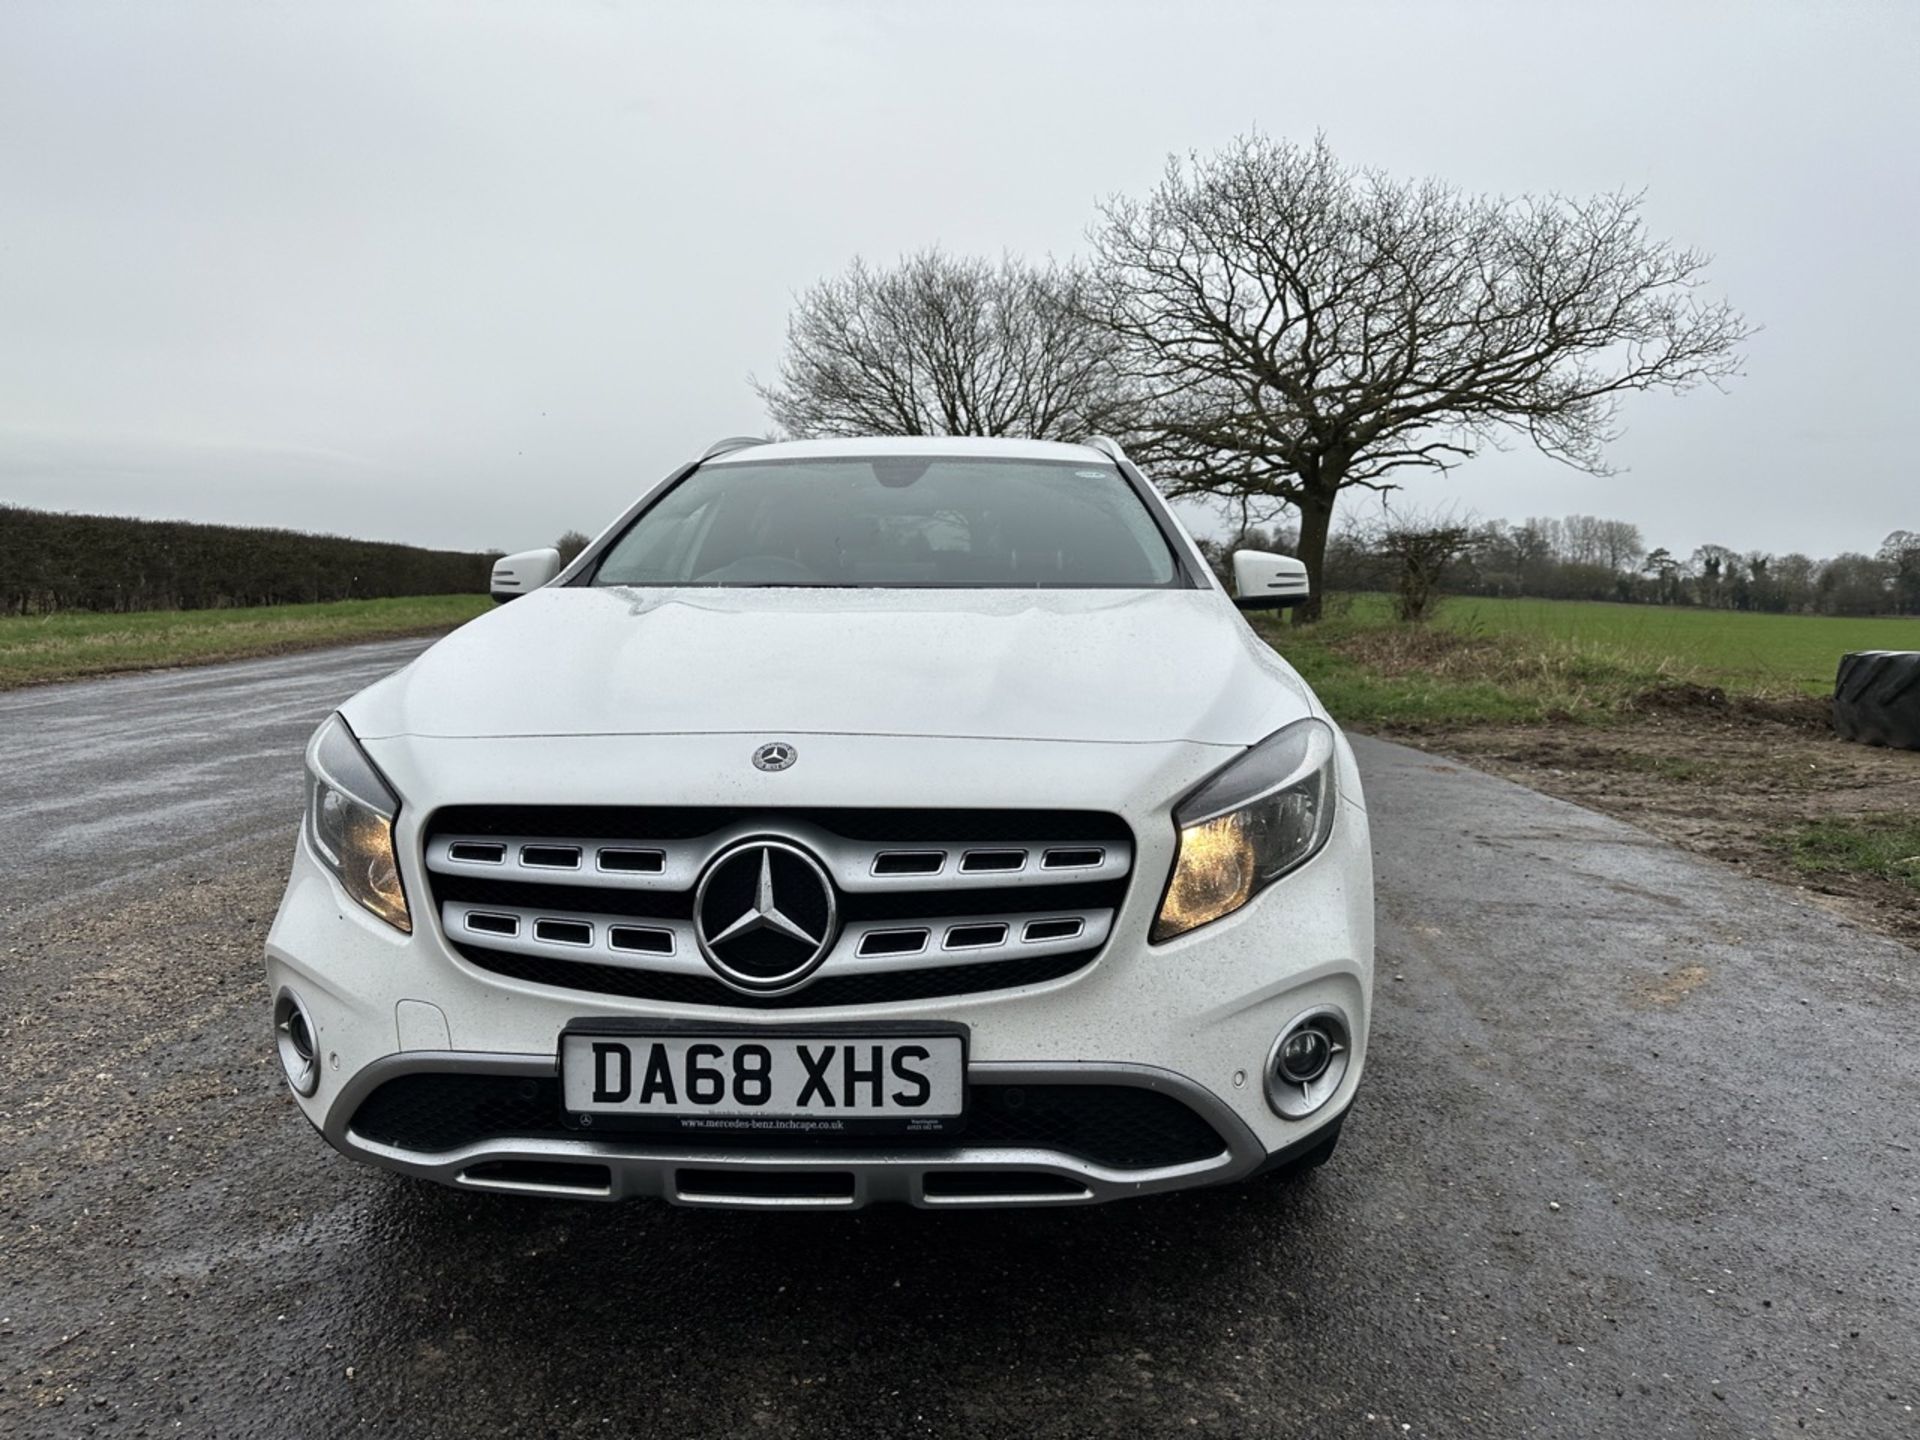 MERCEDES-BENZ GLA 200d “Automatic” Sport Executive 5dr - (2019 Model) *HIGH SPEC* 79k Miles Only - Image 18 of 24